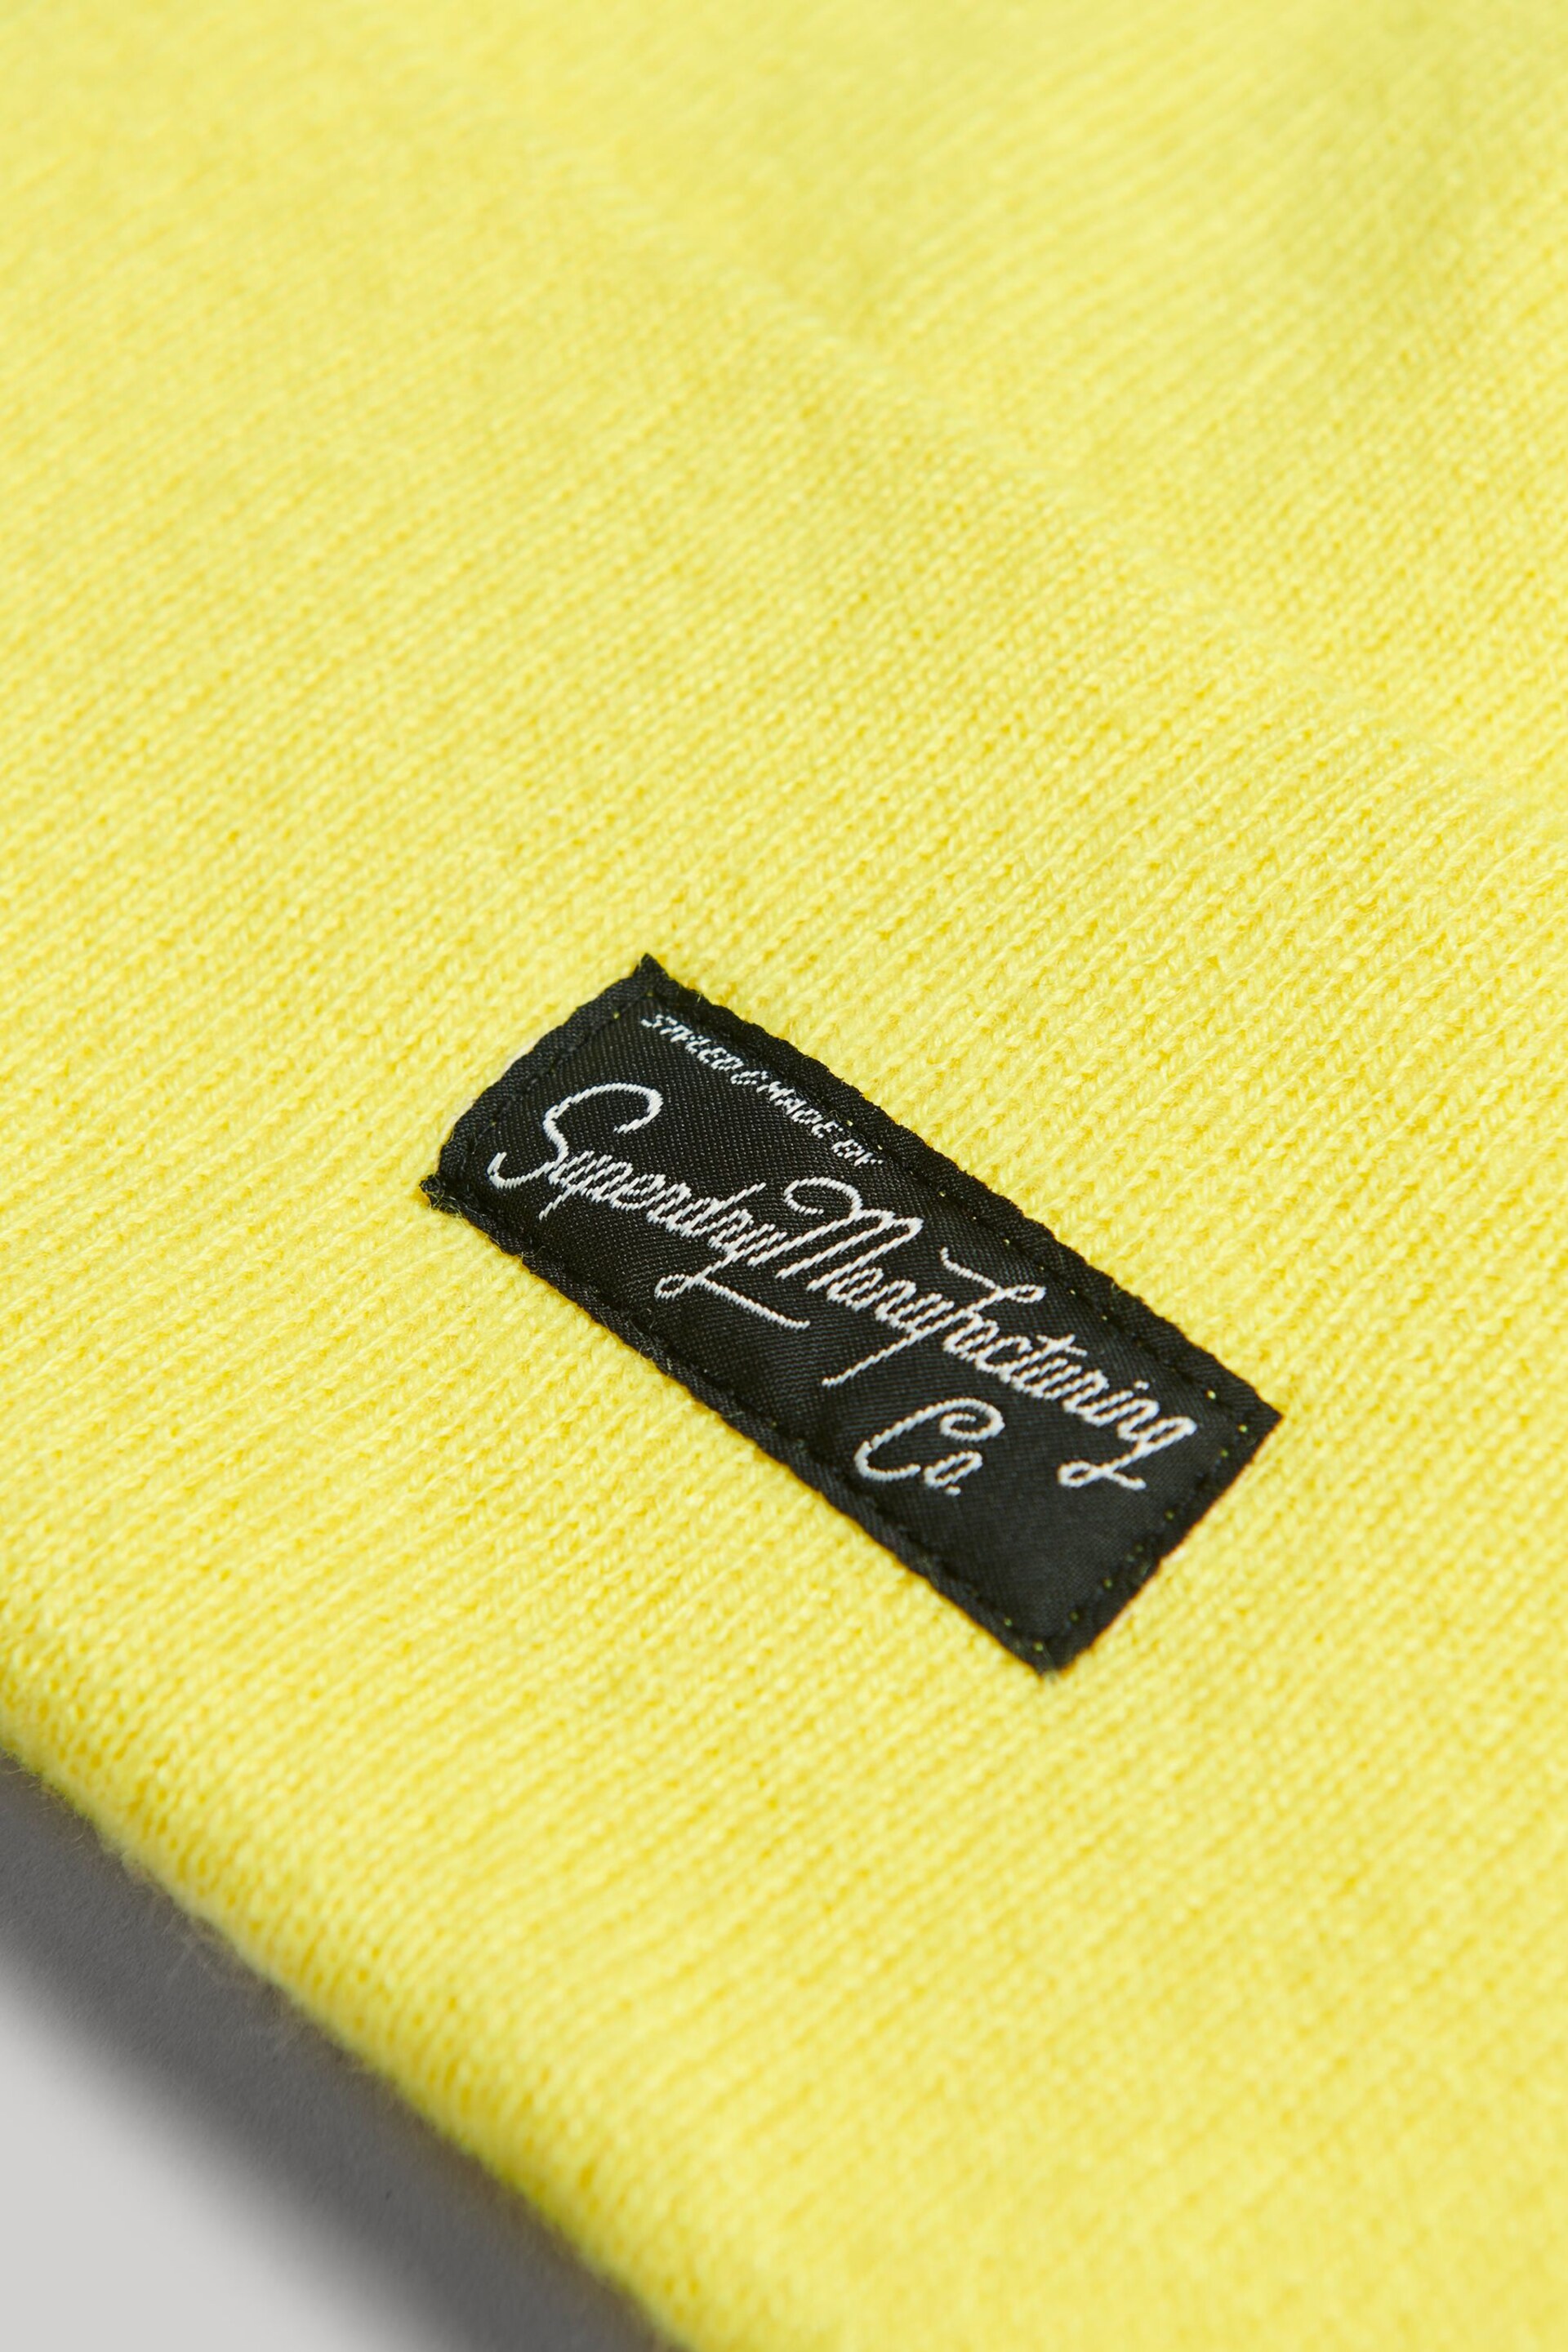 Superdry Yellow Essential Logo Bobble hat - Image 2 of 2